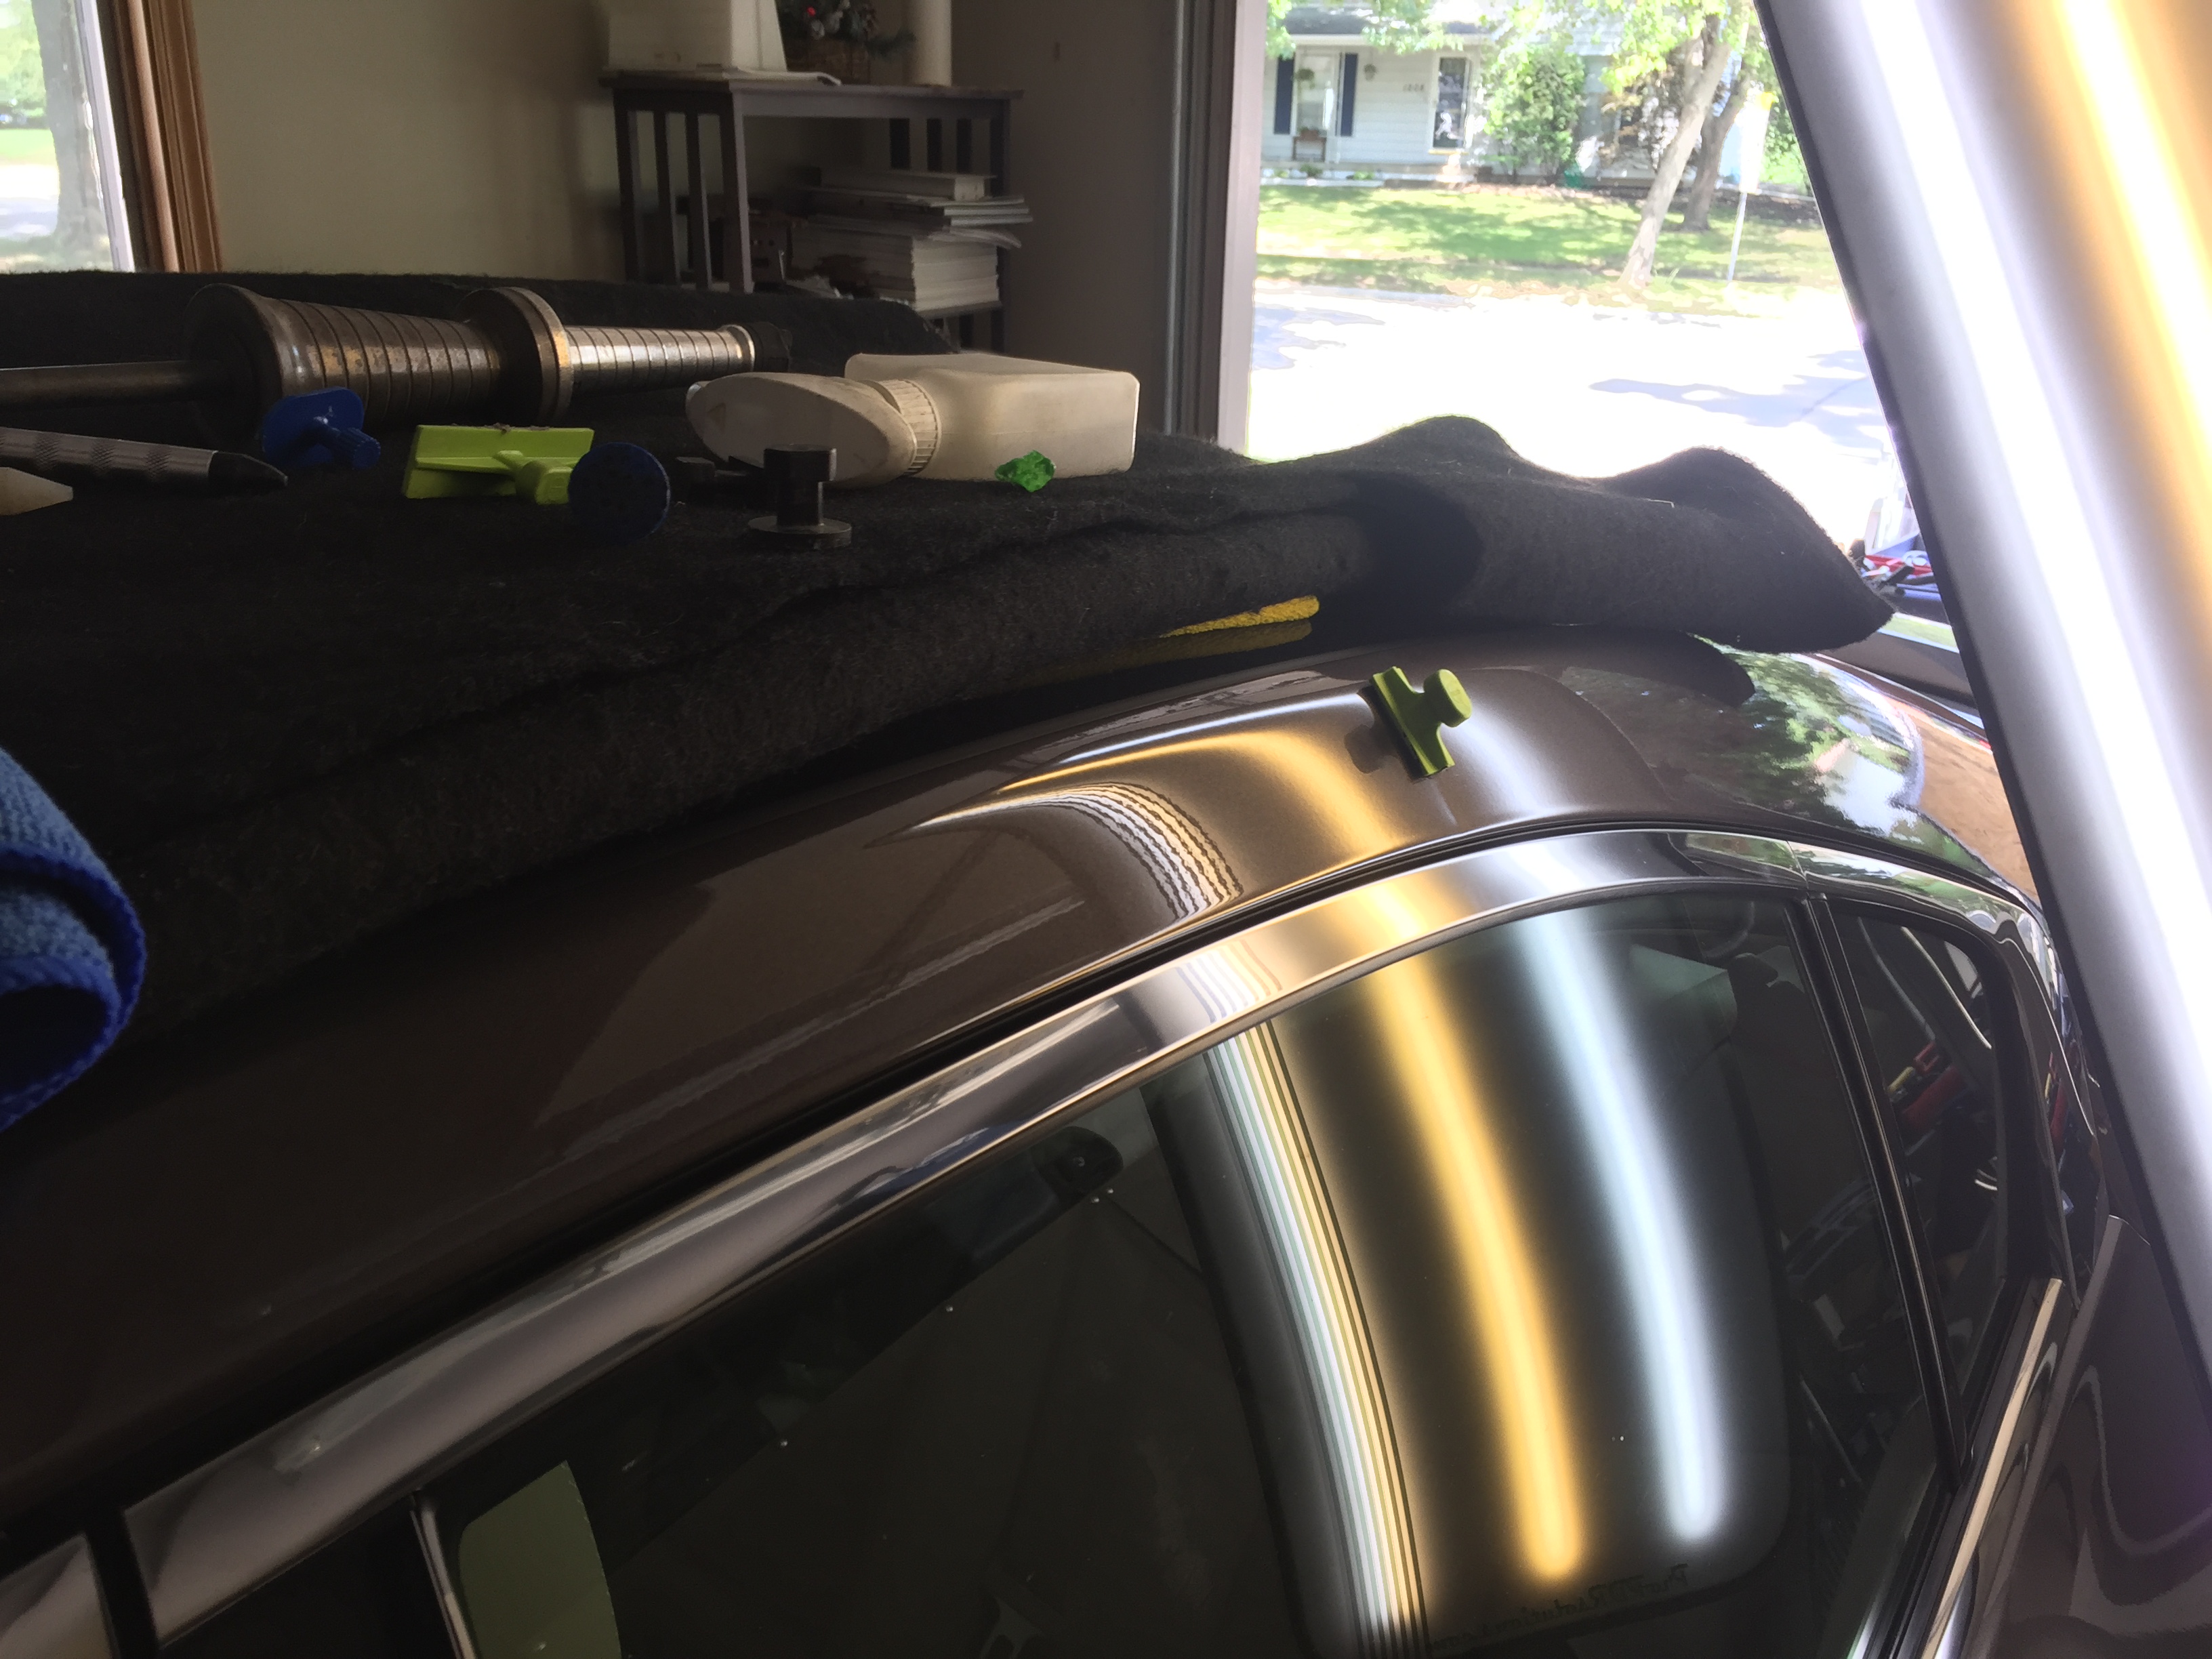 2013 Nissan Maxima Roof Rail Cressed Dent, Removed with the paintless dent removal process, and was removed by Michael Bocek out of Springfield, IL http://217dent.com